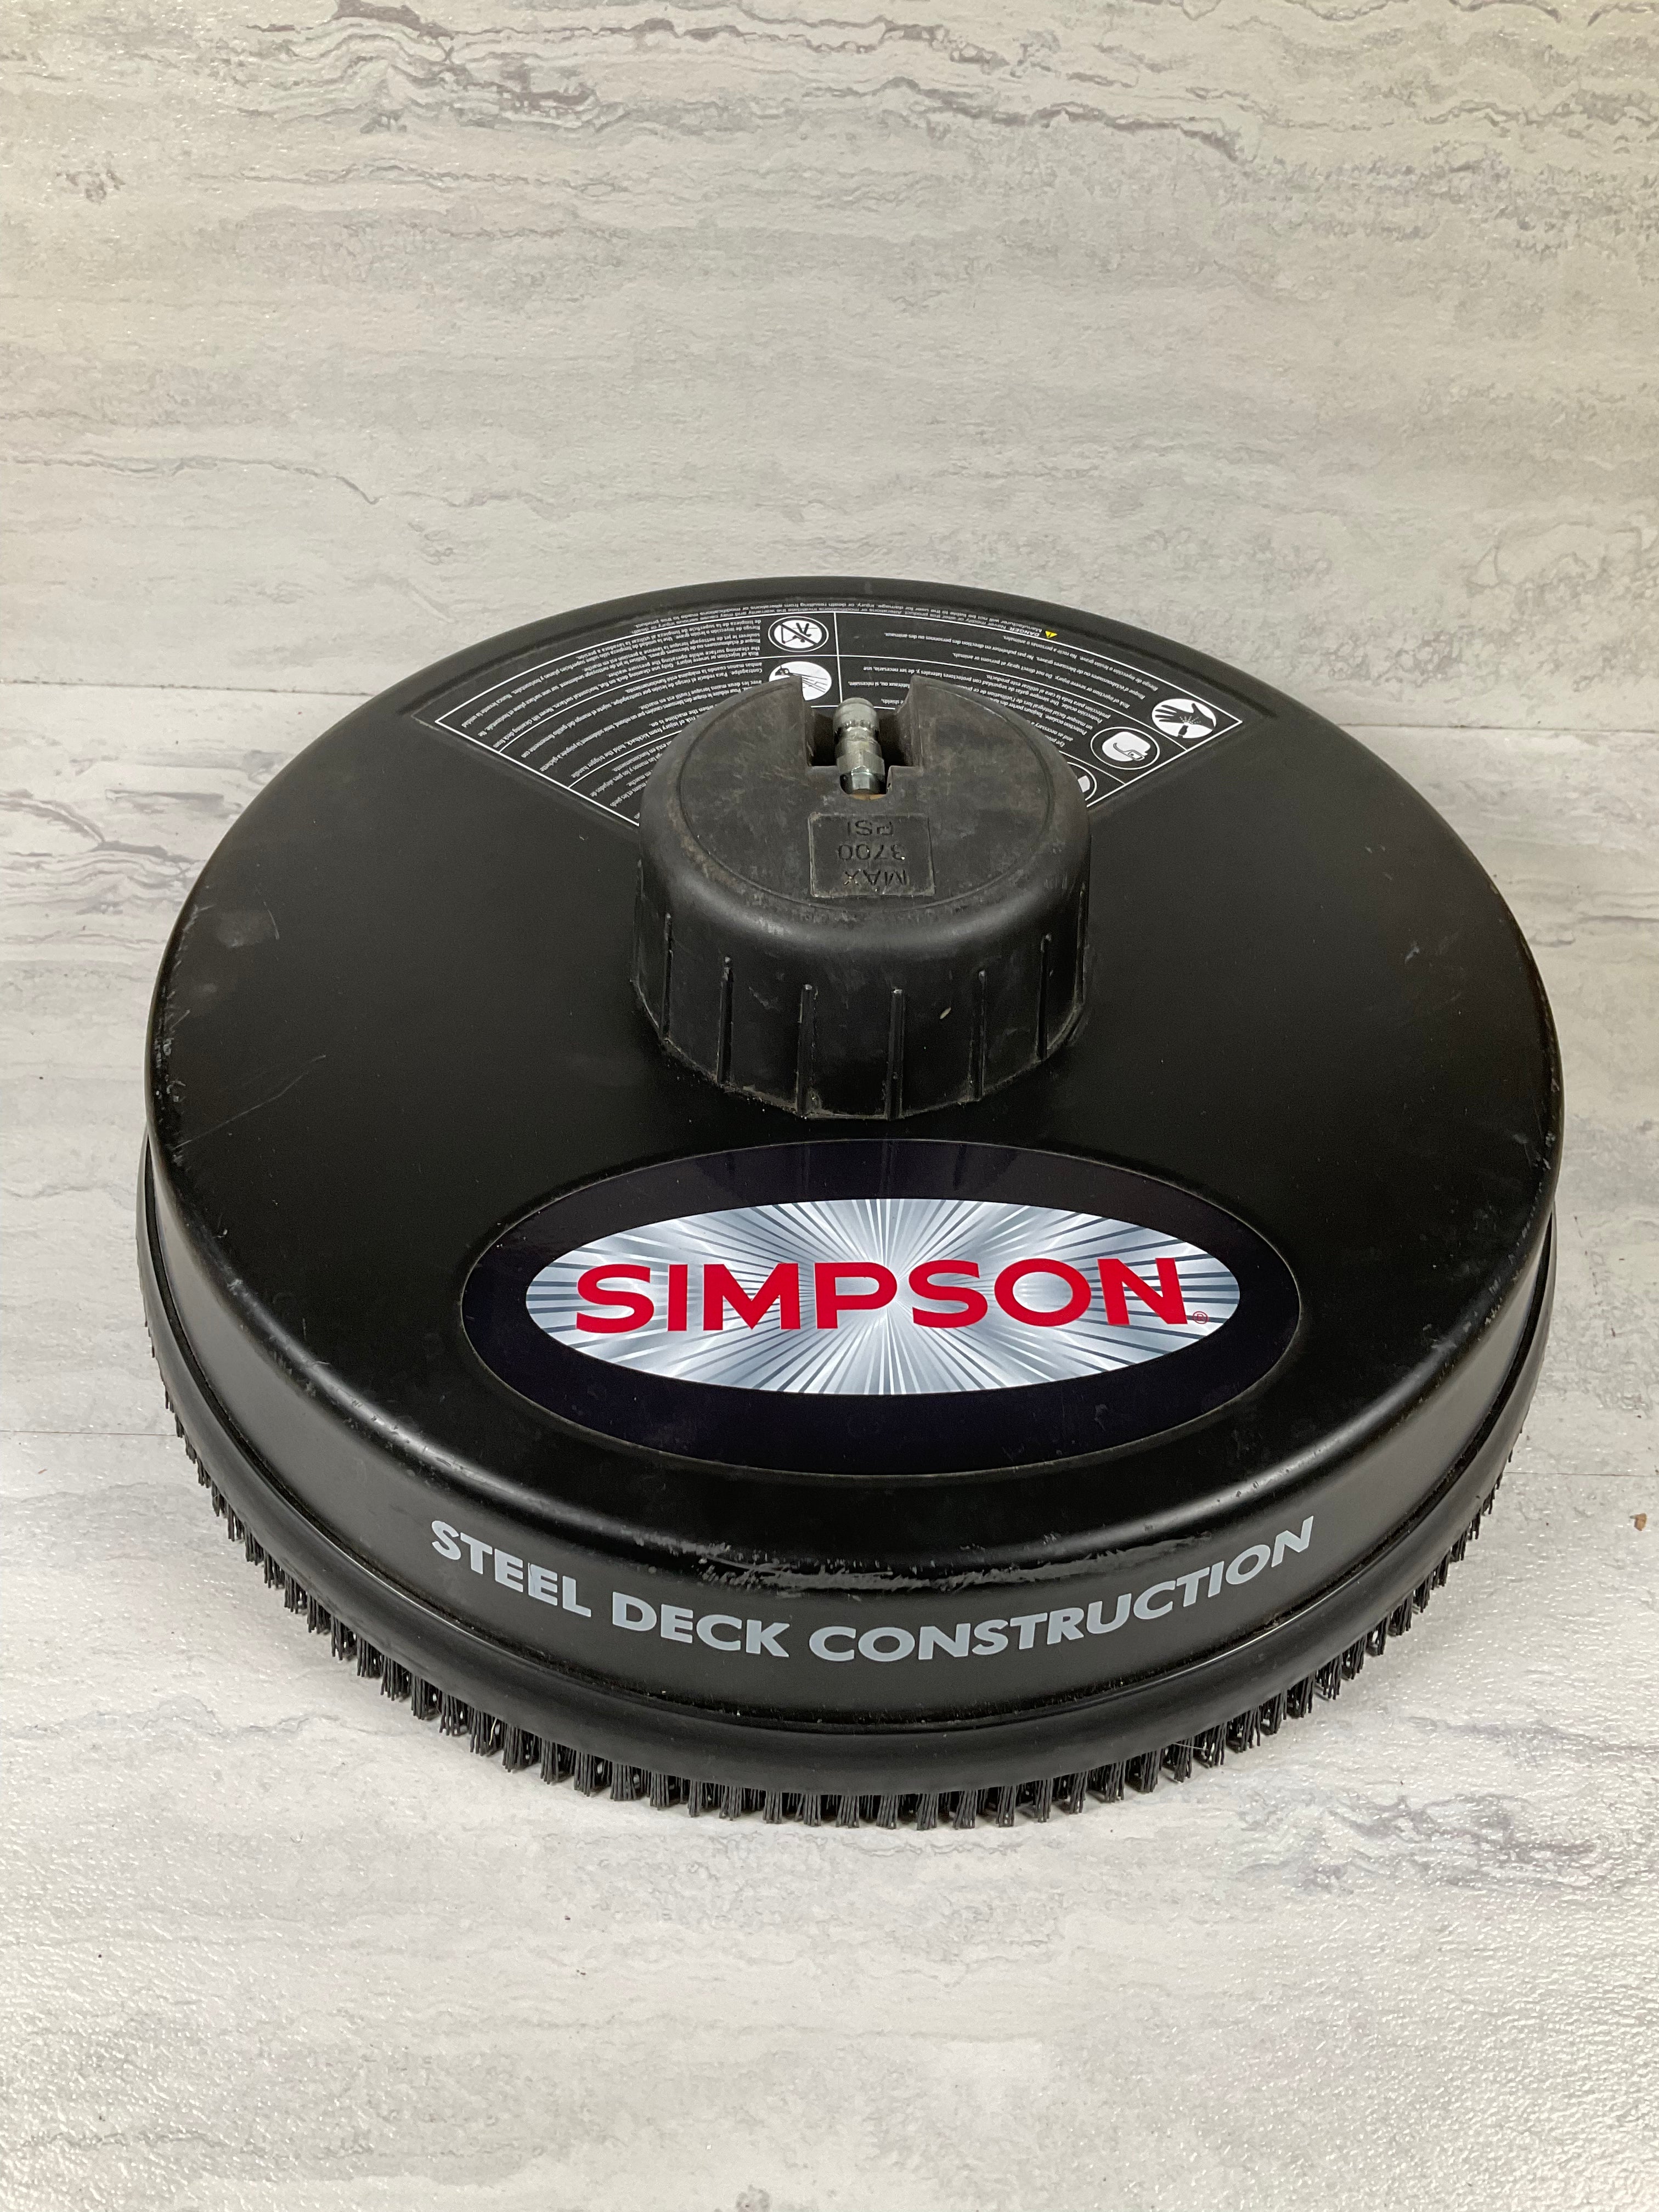 Simpson 15 in. Steel Surface Cleaner Rated up to 3700 PSI (6903544971447)